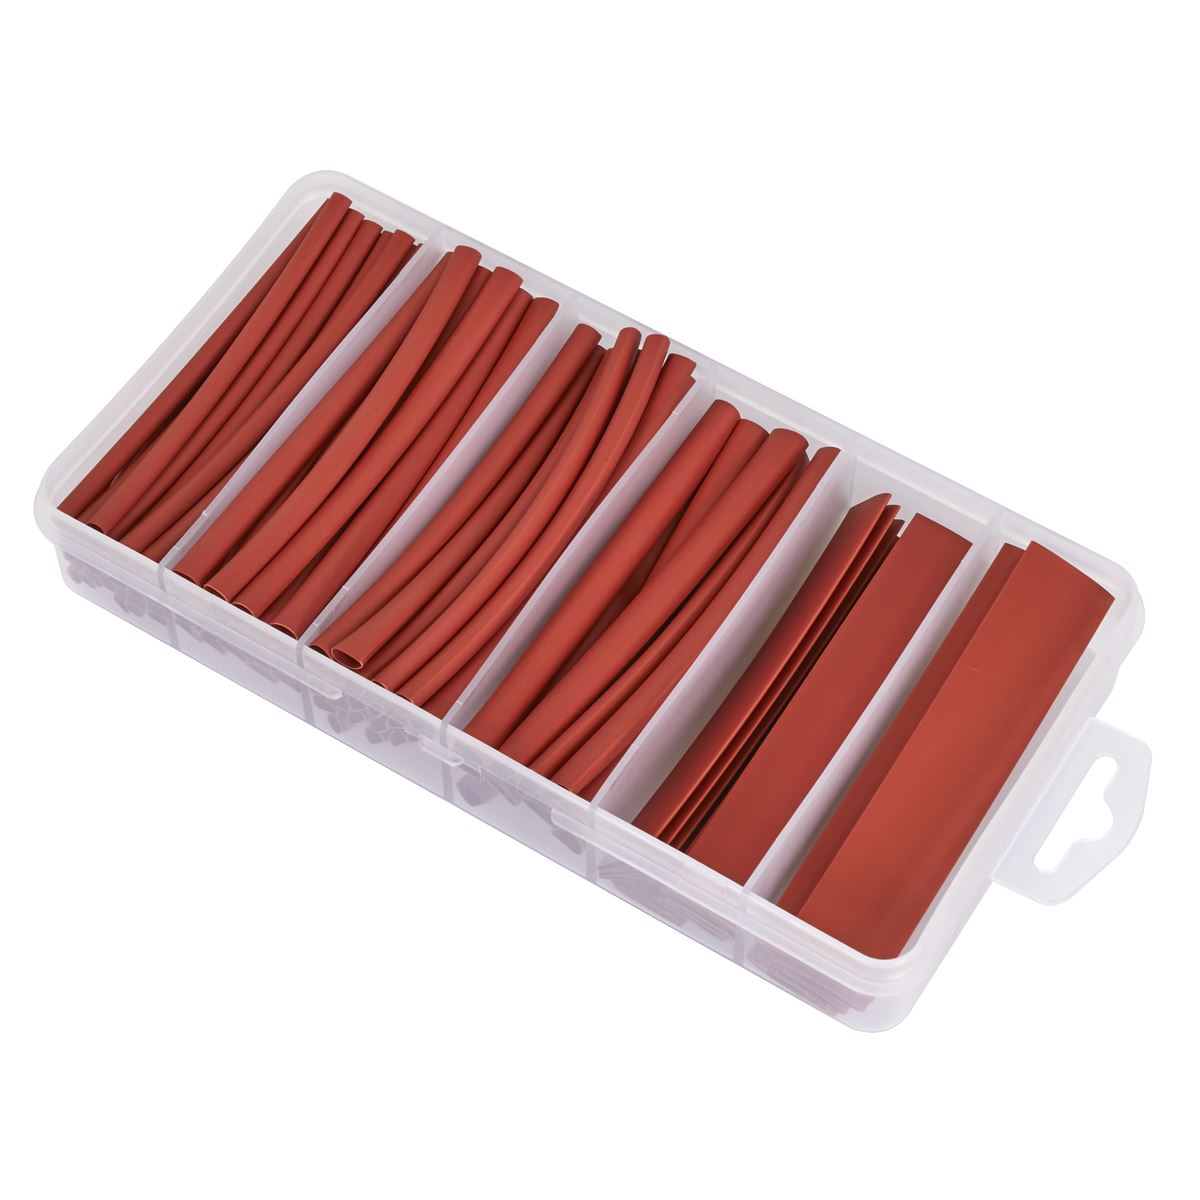 Sealey Heat Shrink Tubing Assortment 95pc 100mm Red